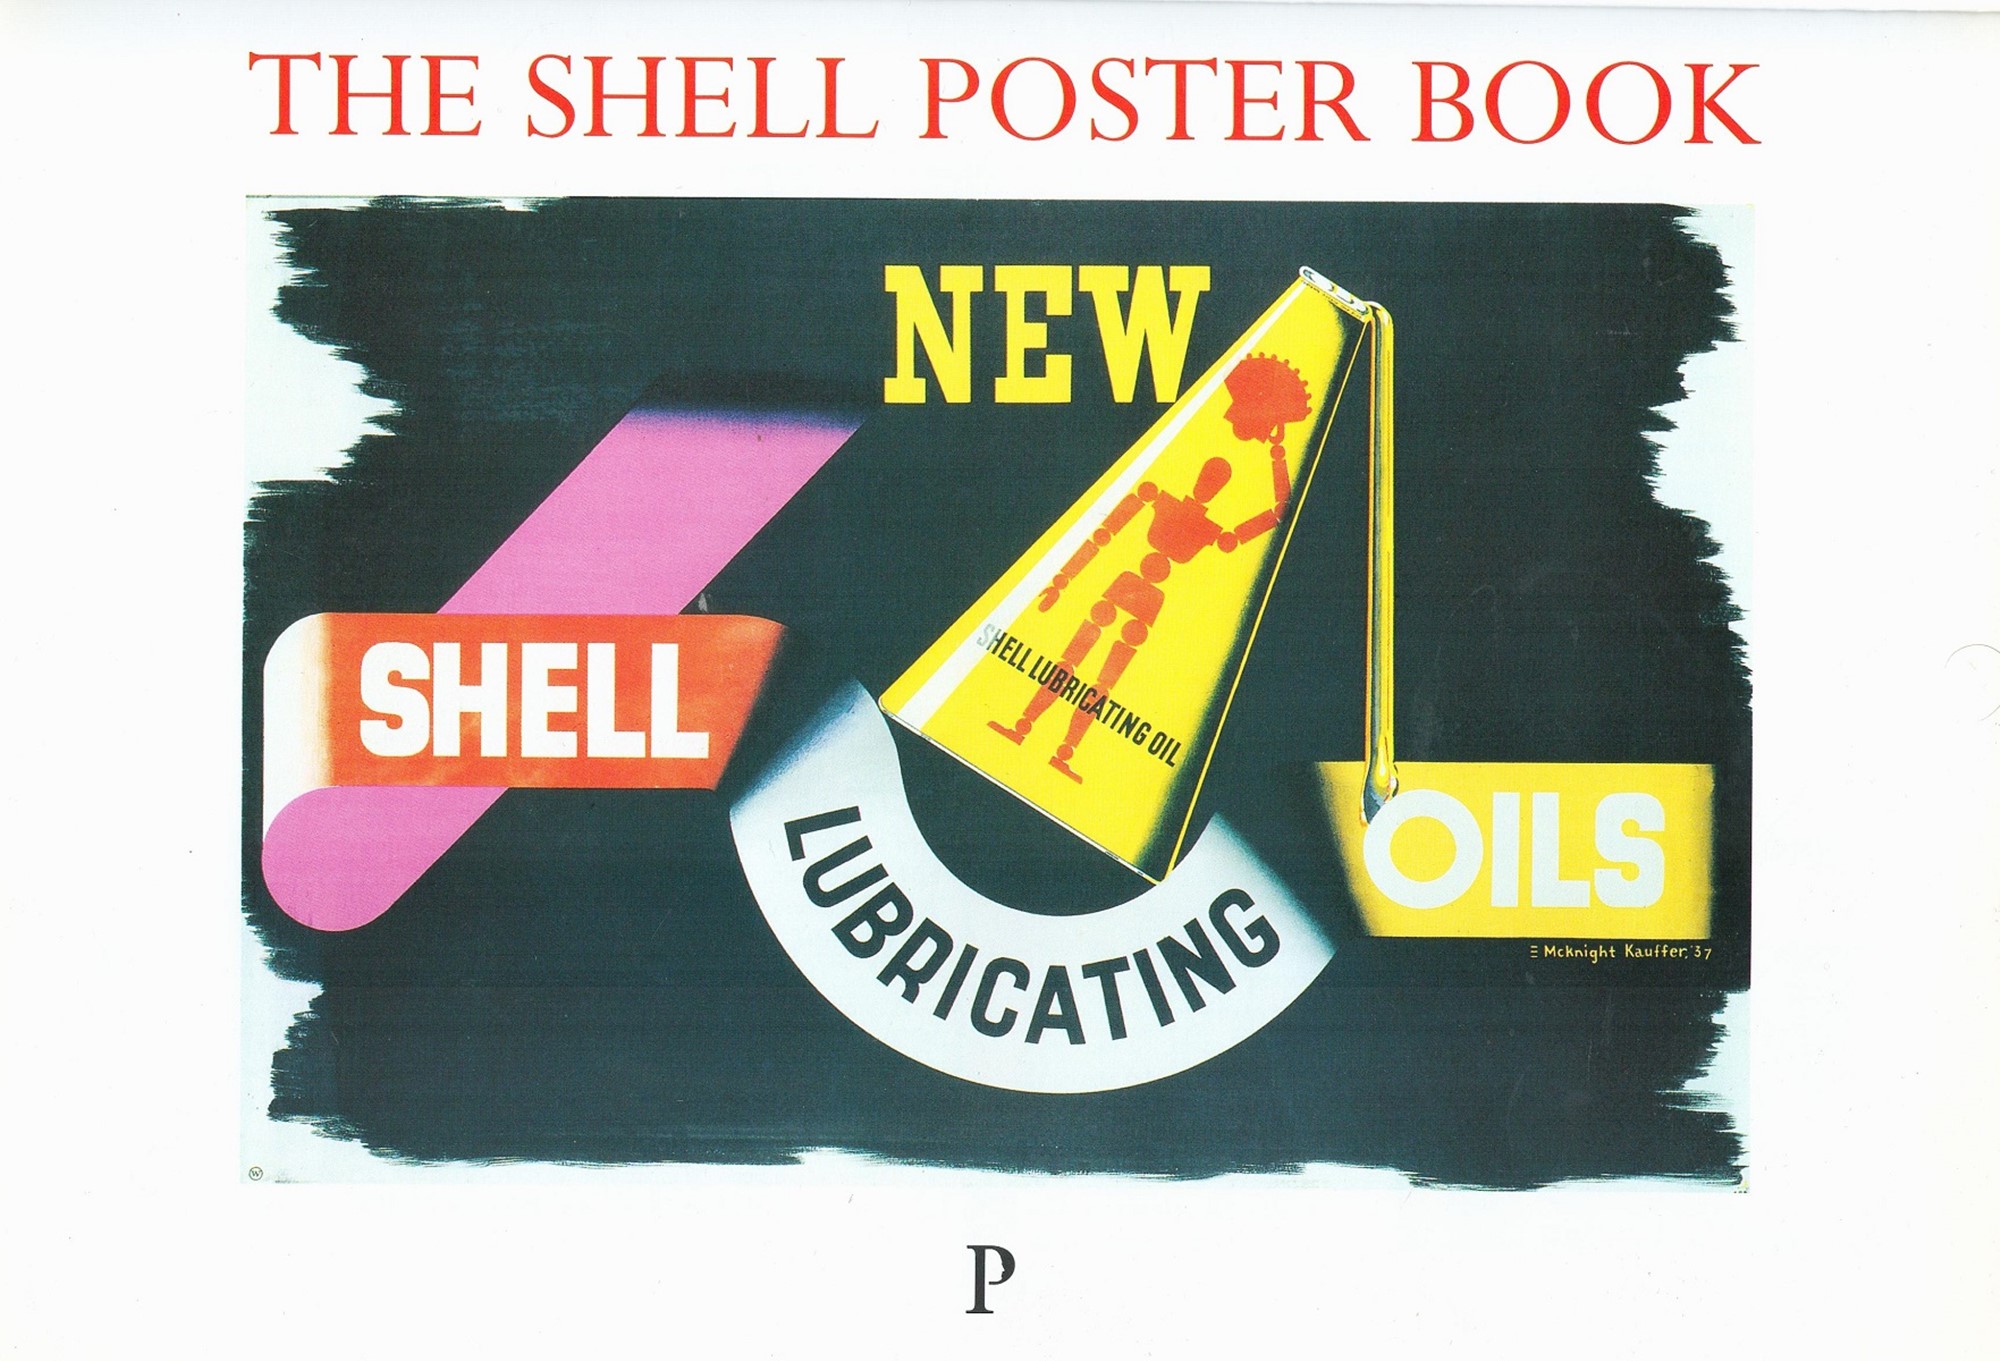 The Shell Poster Book Oil and Petrol Softback Book 1998 First Edition published by Profile Books Ltd - Image 4 of 6